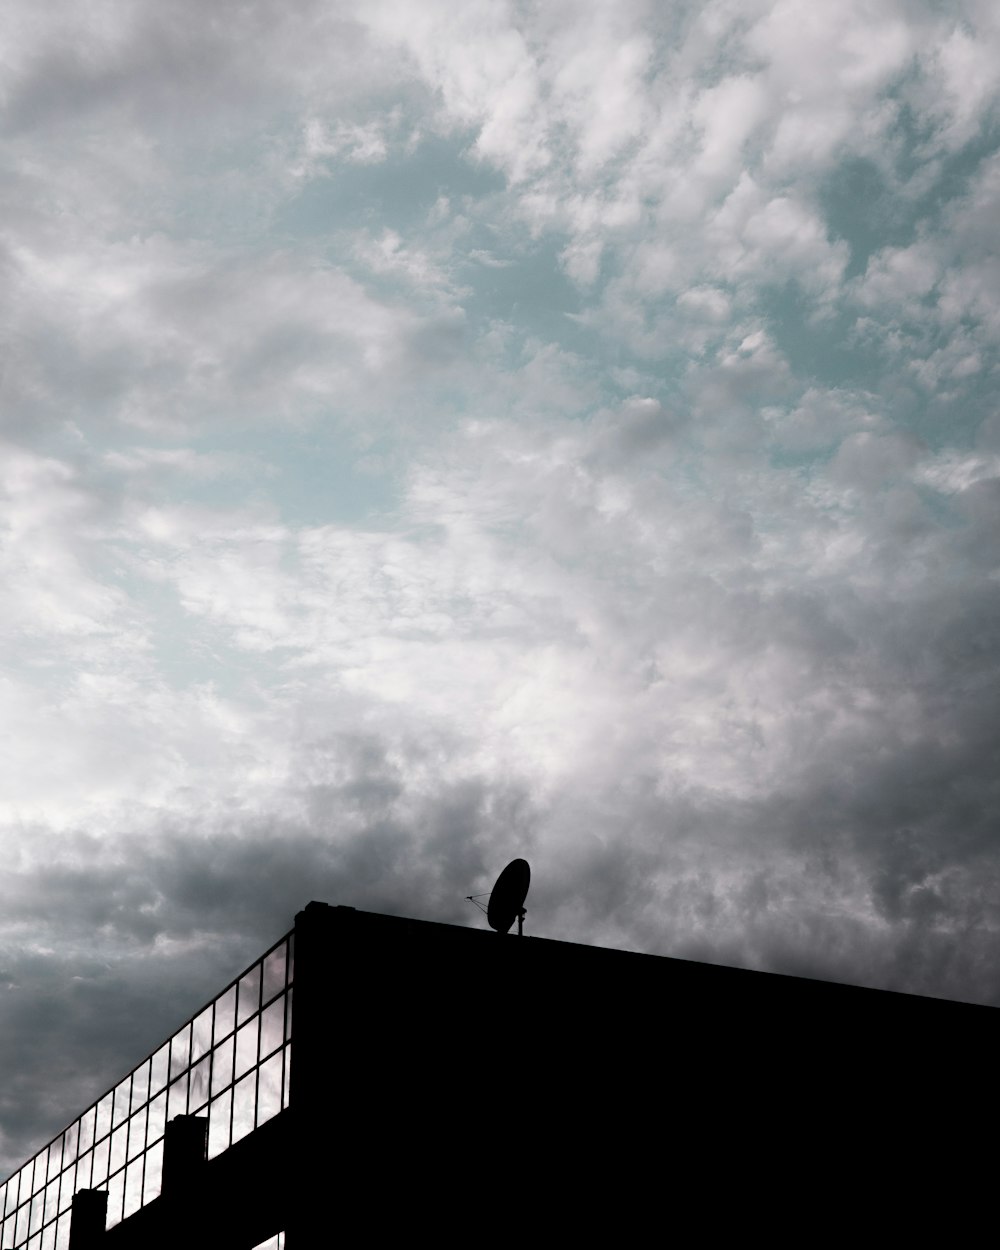 a bird sitting on top of a building under a cloudy sky